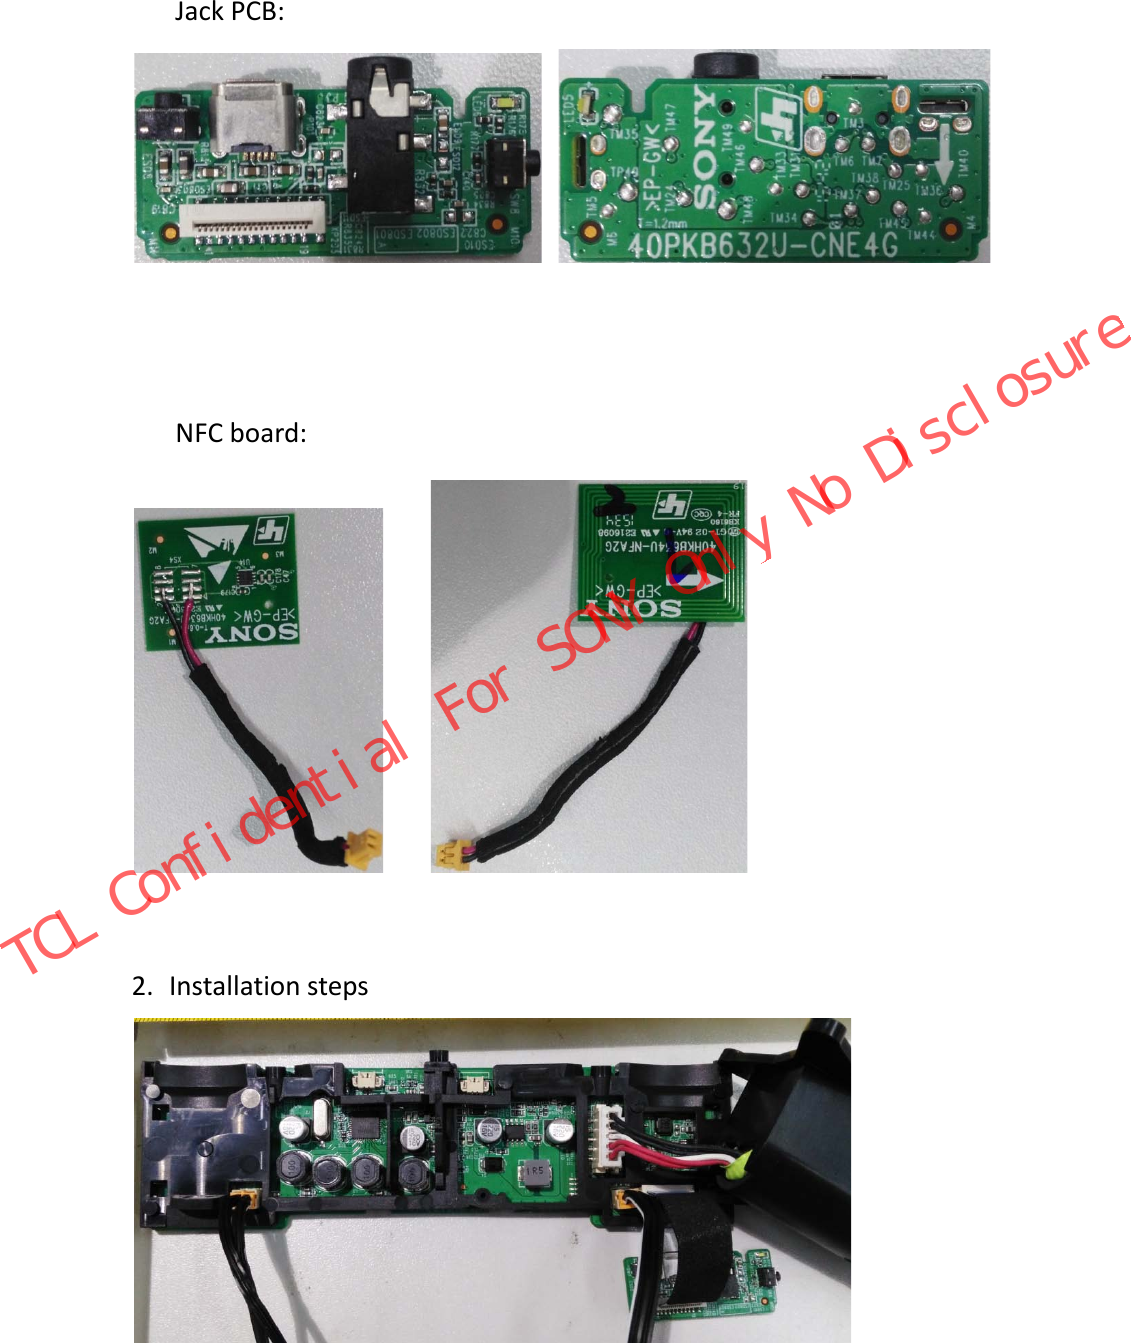  Jack PCB:       NFC board:       2. Installation steps  TCL Confidential For SONY Only No Disclosure